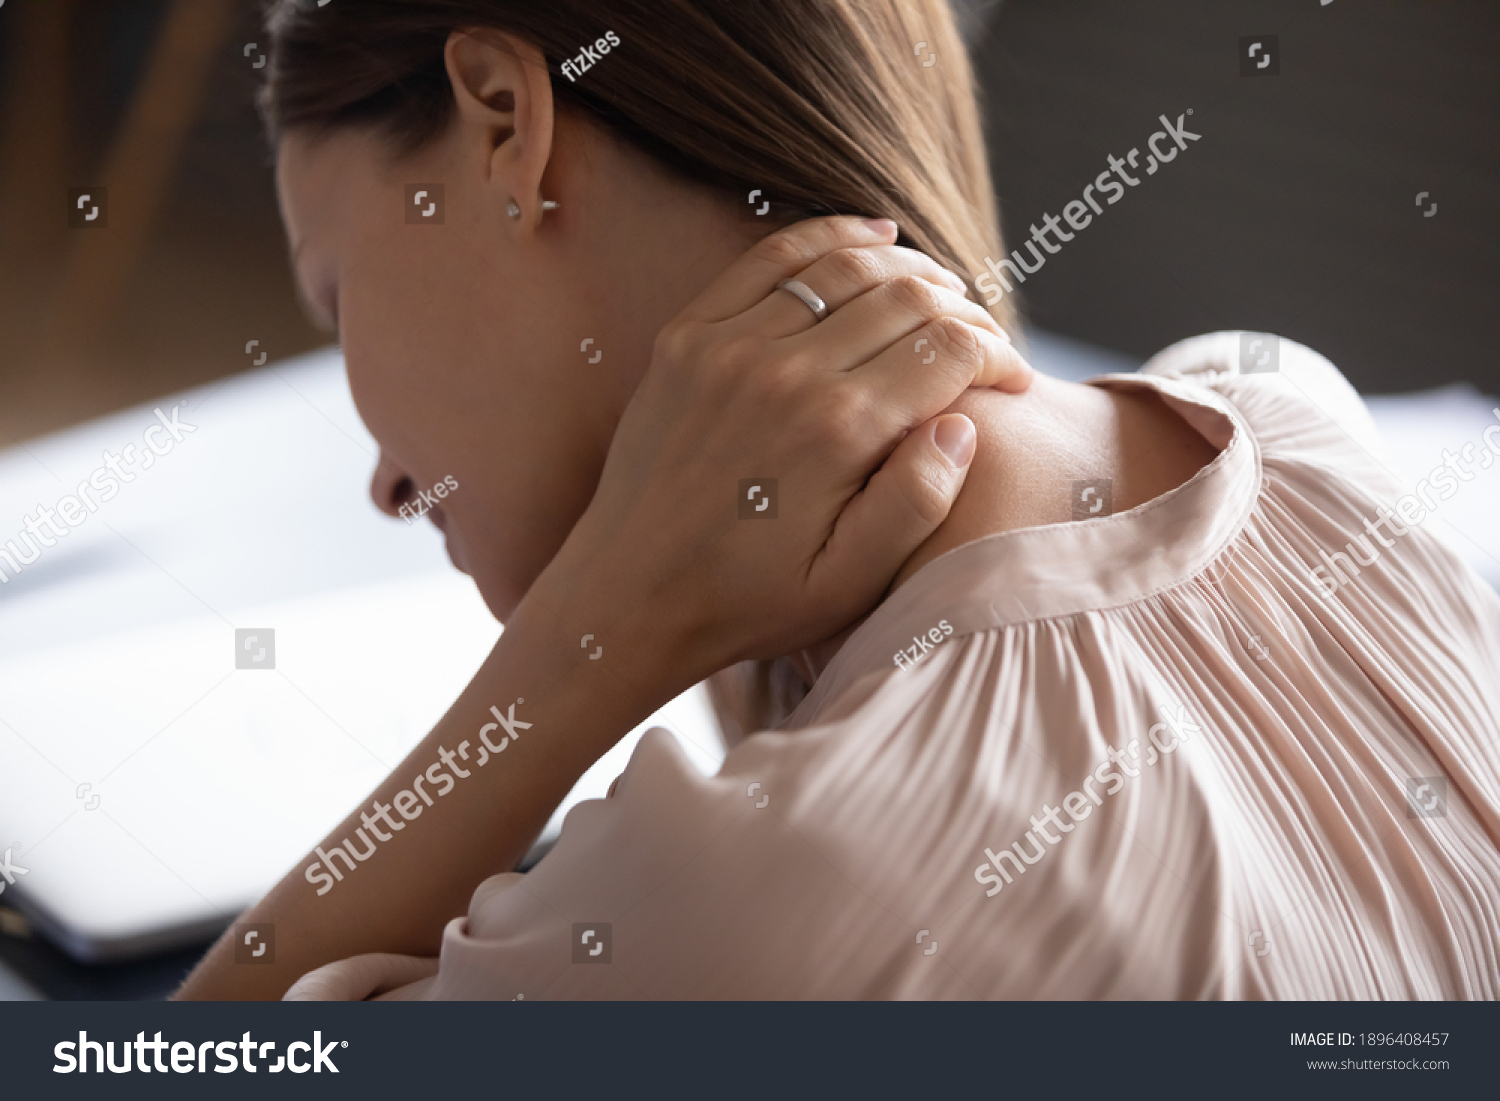 Close up exhausted woman touching massaging tensed neck muscles, feeling unwell after long hours sedentary work, uncomfortable chair, incorrect posture, young female suffering from pain, ache #1896408457